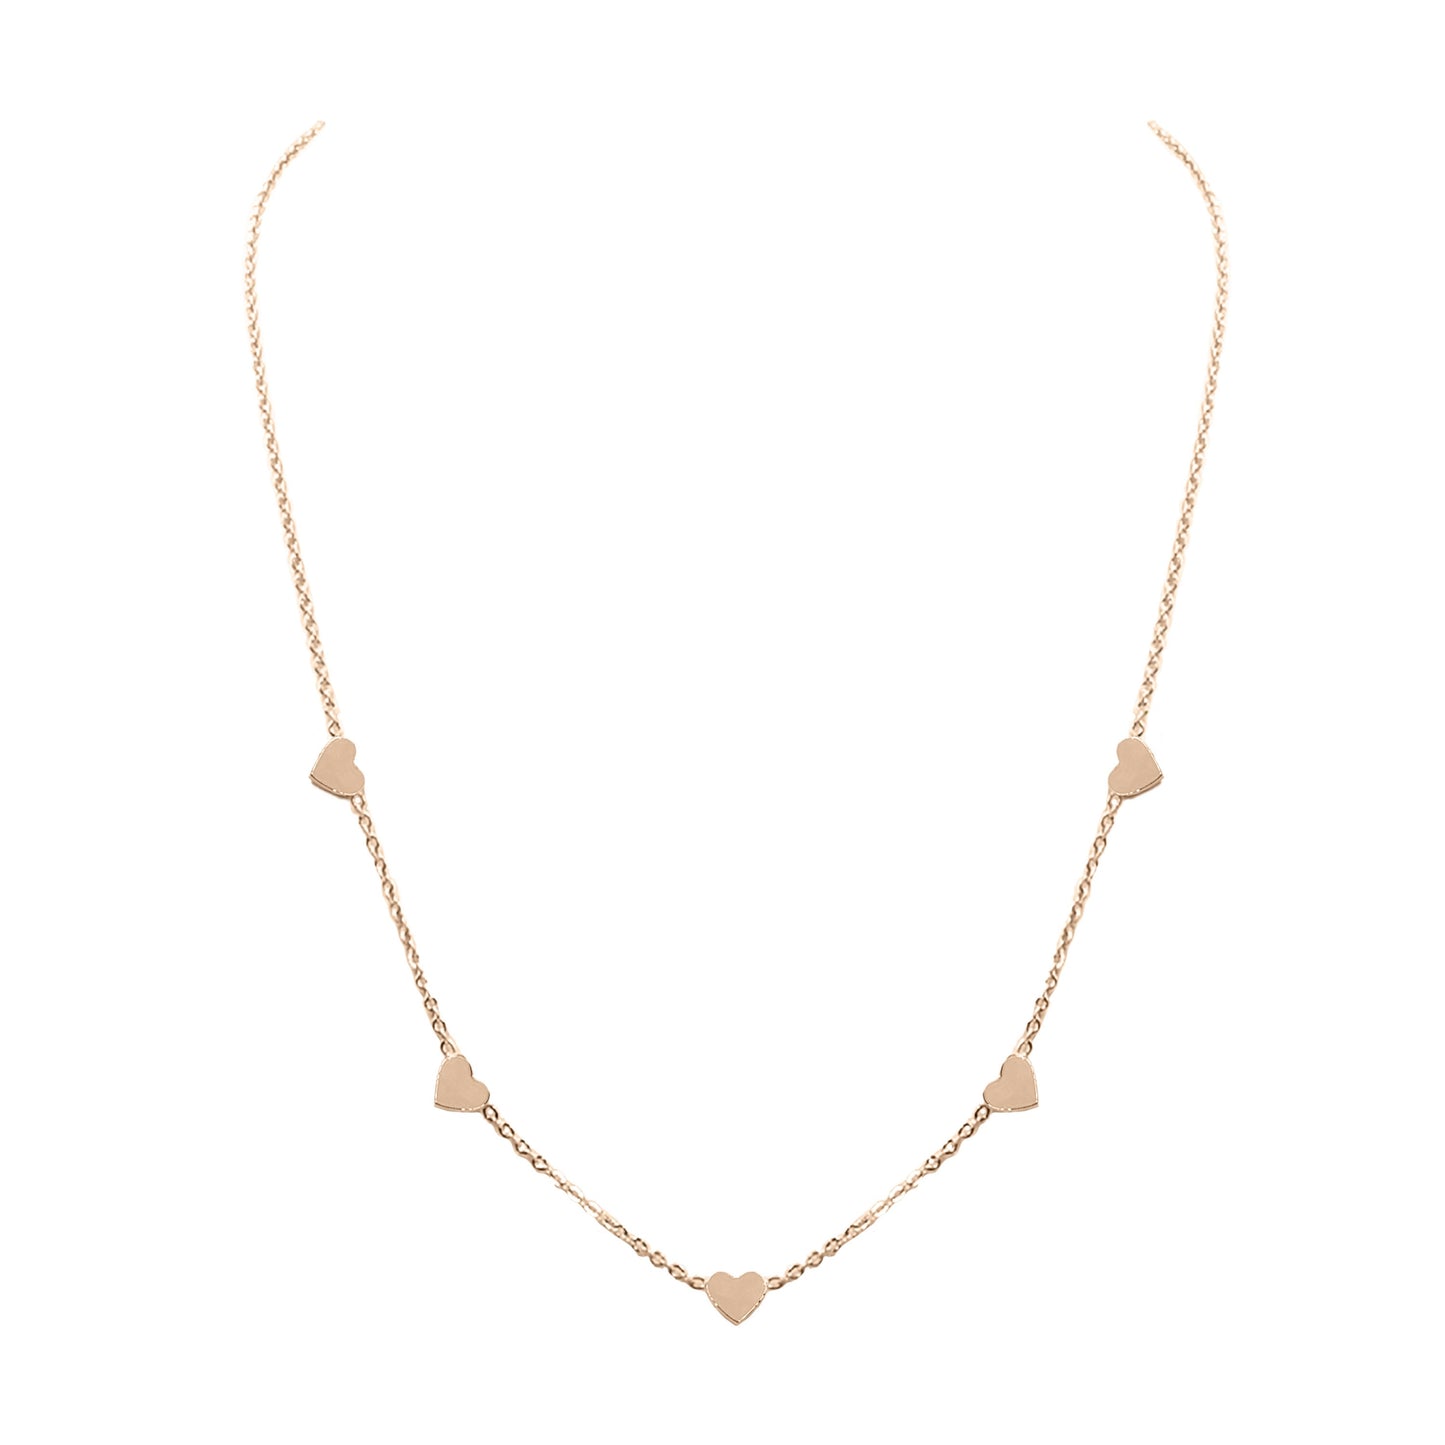 Kinsley Armelle Love Collection- Rose Gold Heart Charm Necklace